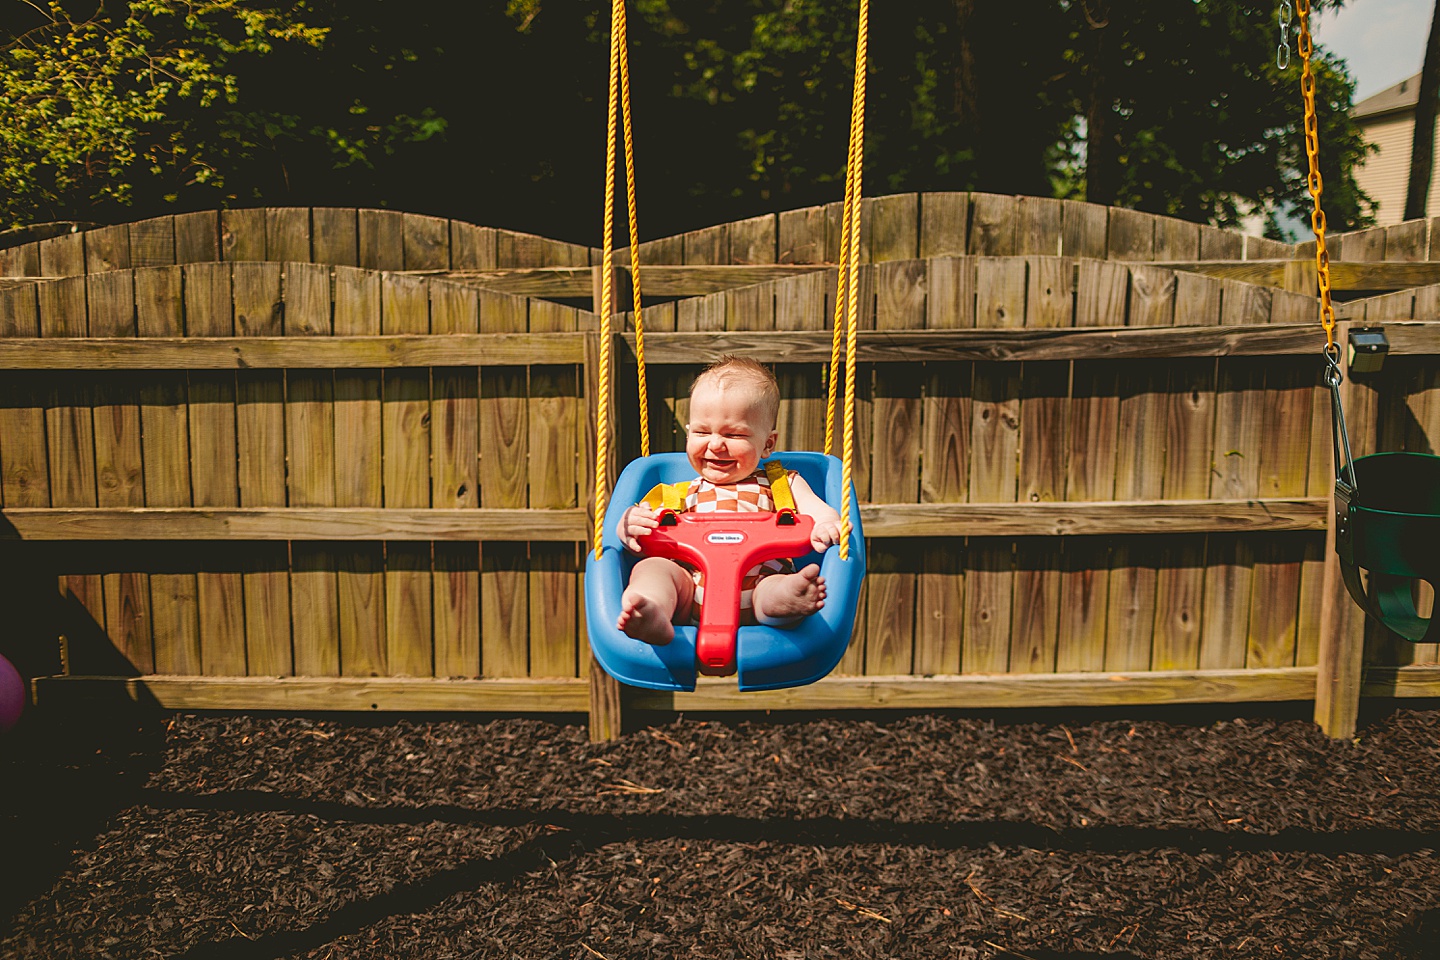 Child in a baby swing in back yard